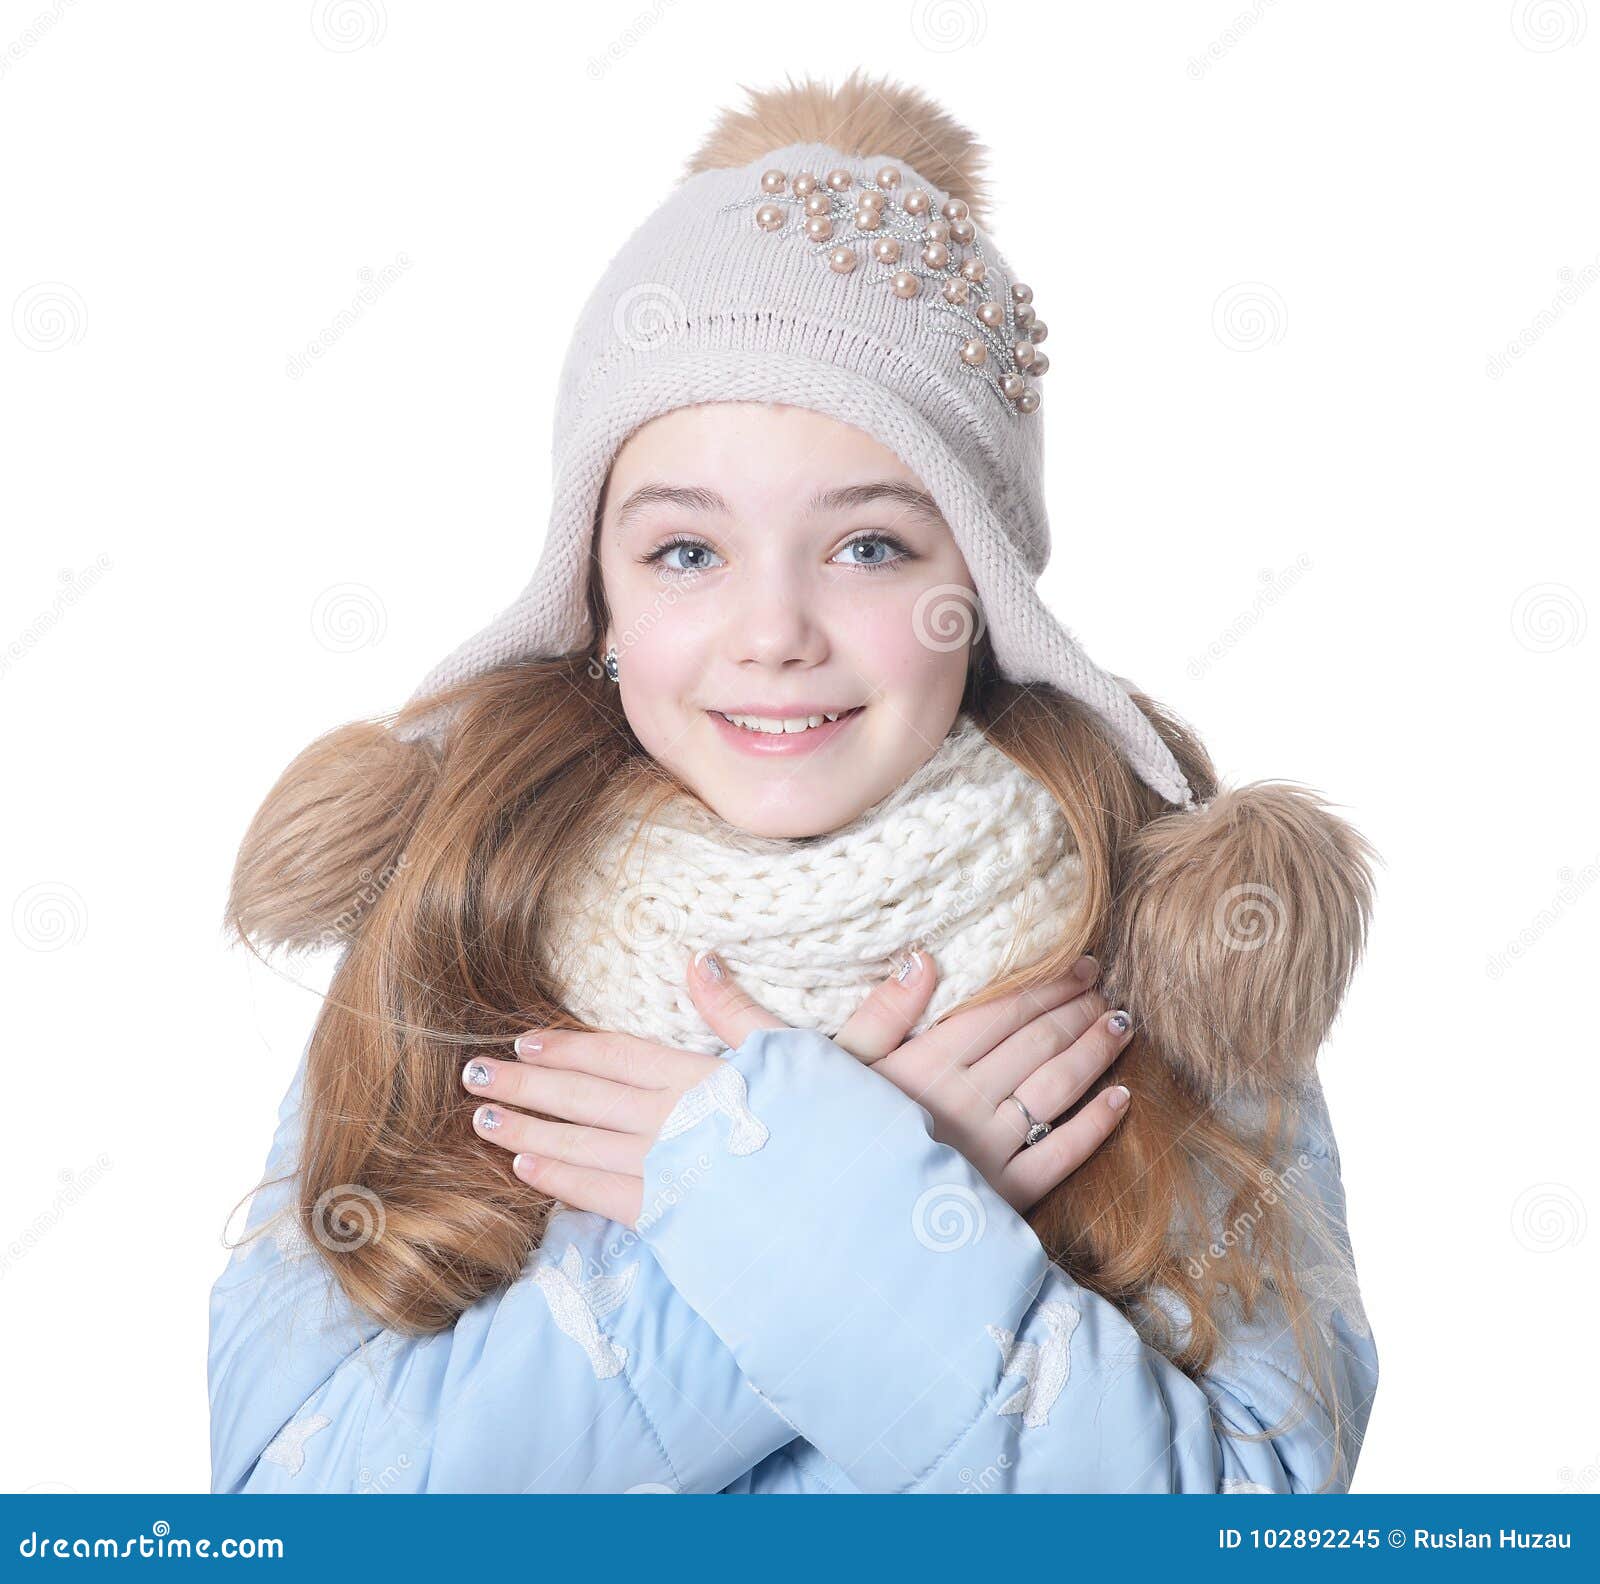 Little Girl in Warm Clothes Stock Image - Image of health, young: 102892245